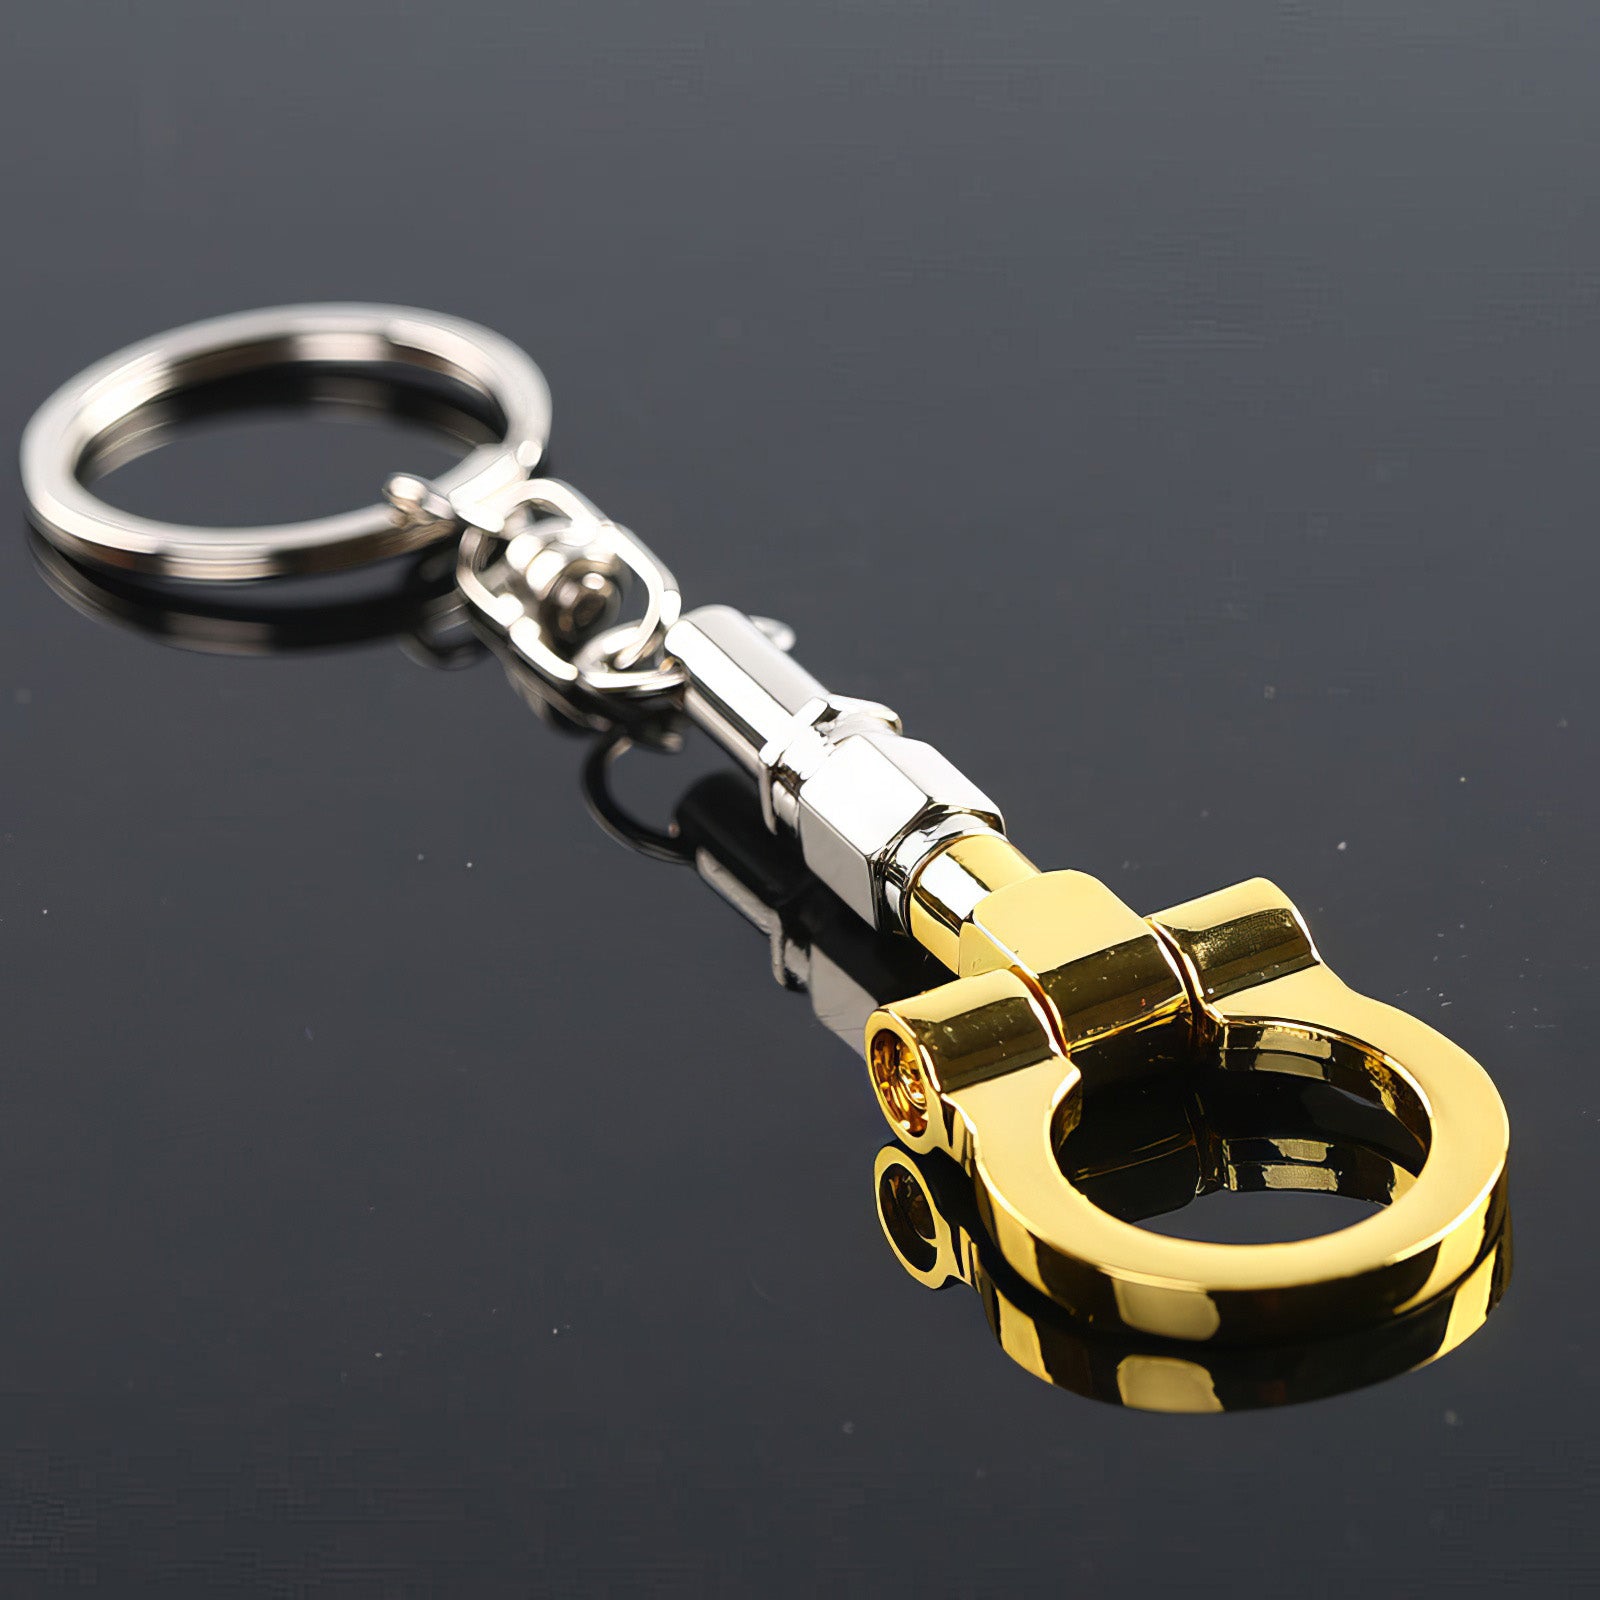 Tow hook keychain with gold hook.